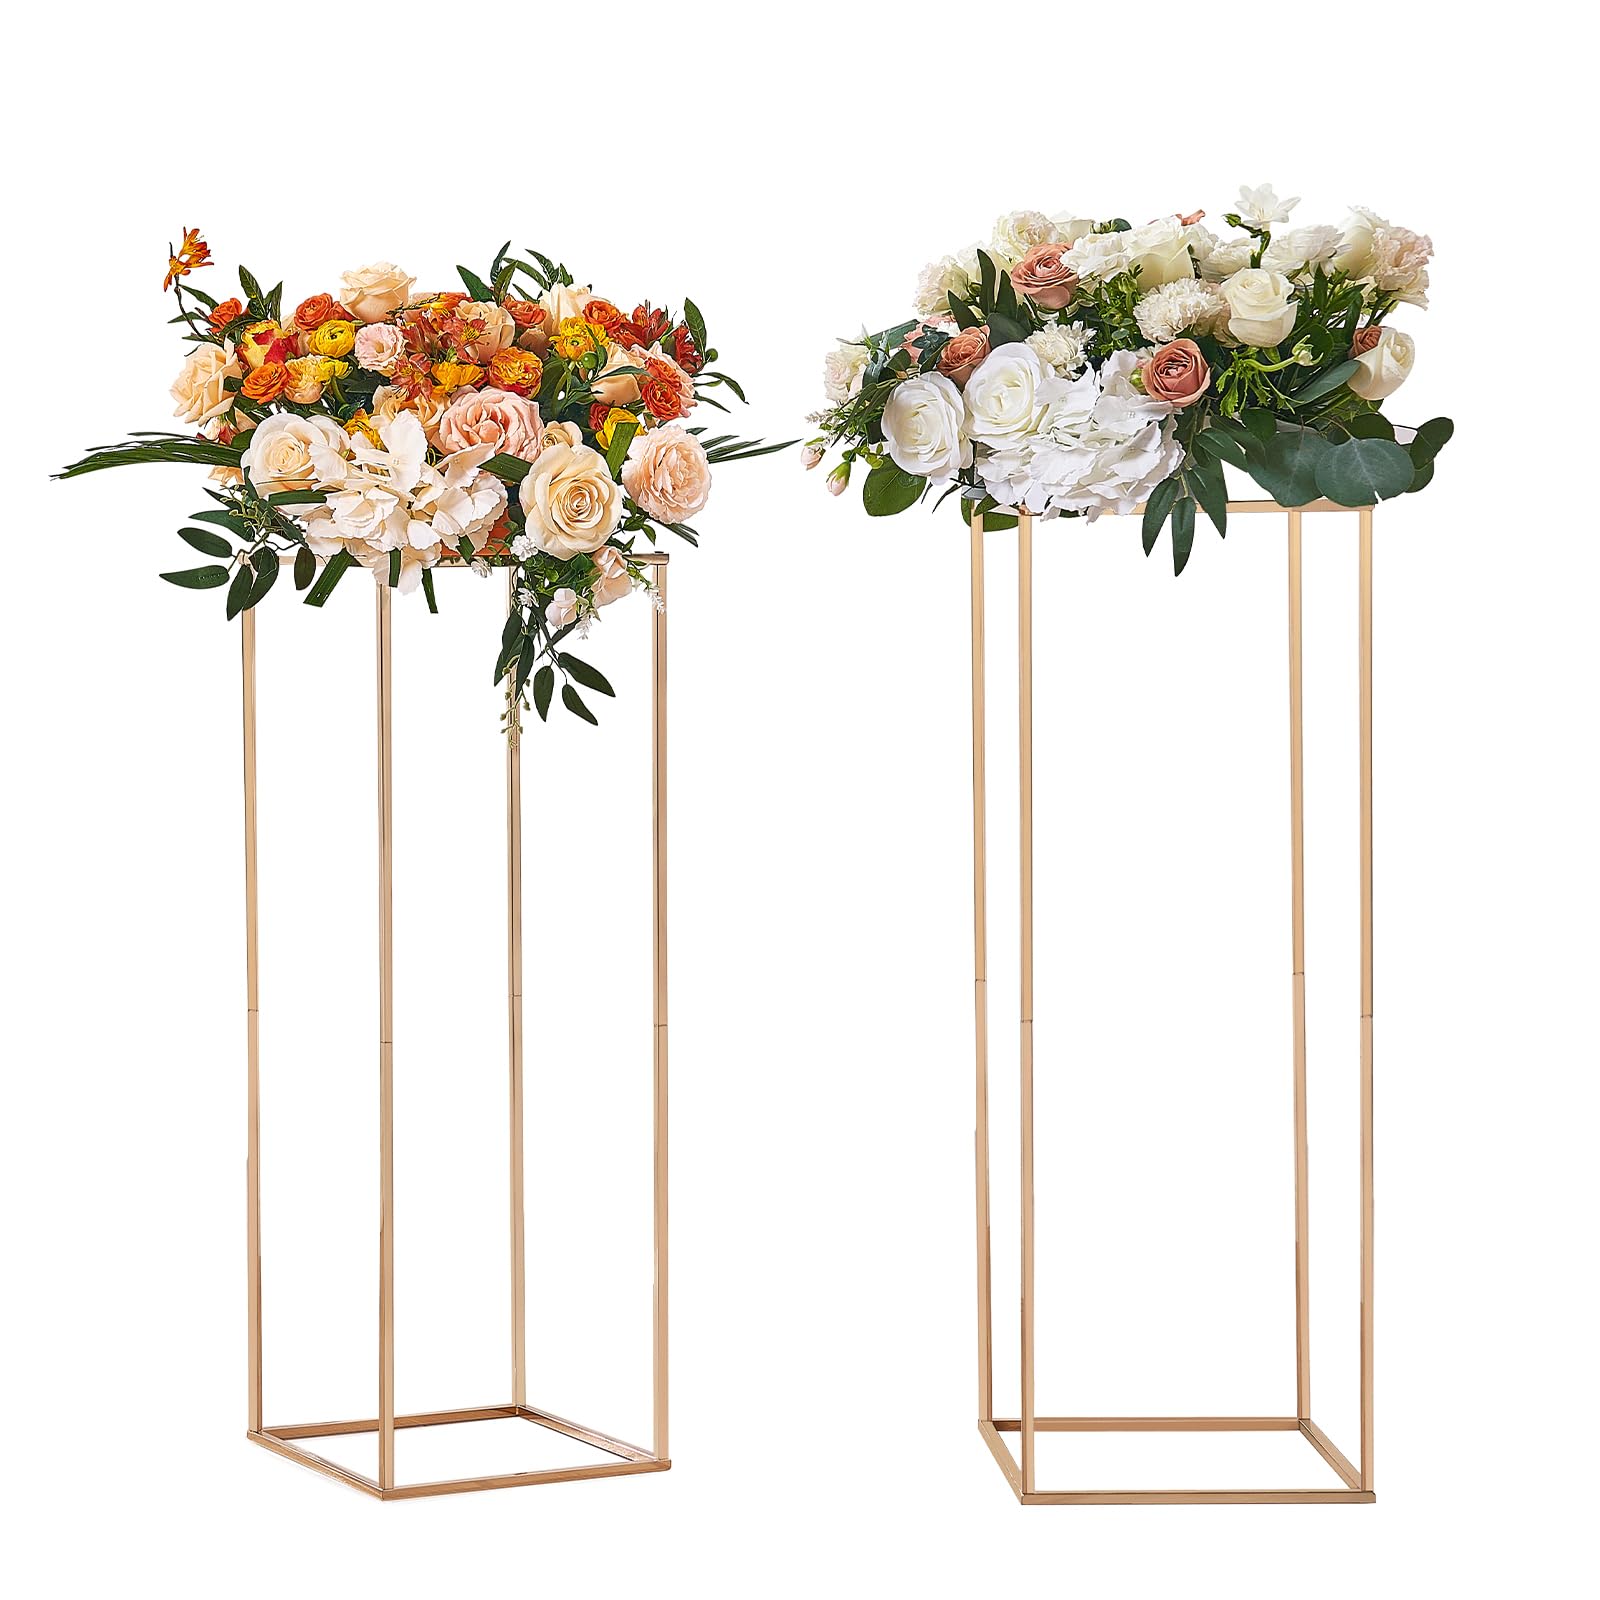 VEVOR 2PCS 31.5inch High Wedding Flower Stand, with Acrylic Laminate,Metal Vase Column Geometric Centerpiece Stands, Gold Rectangular Floral Display Rack for Events Reception, Party Decoration